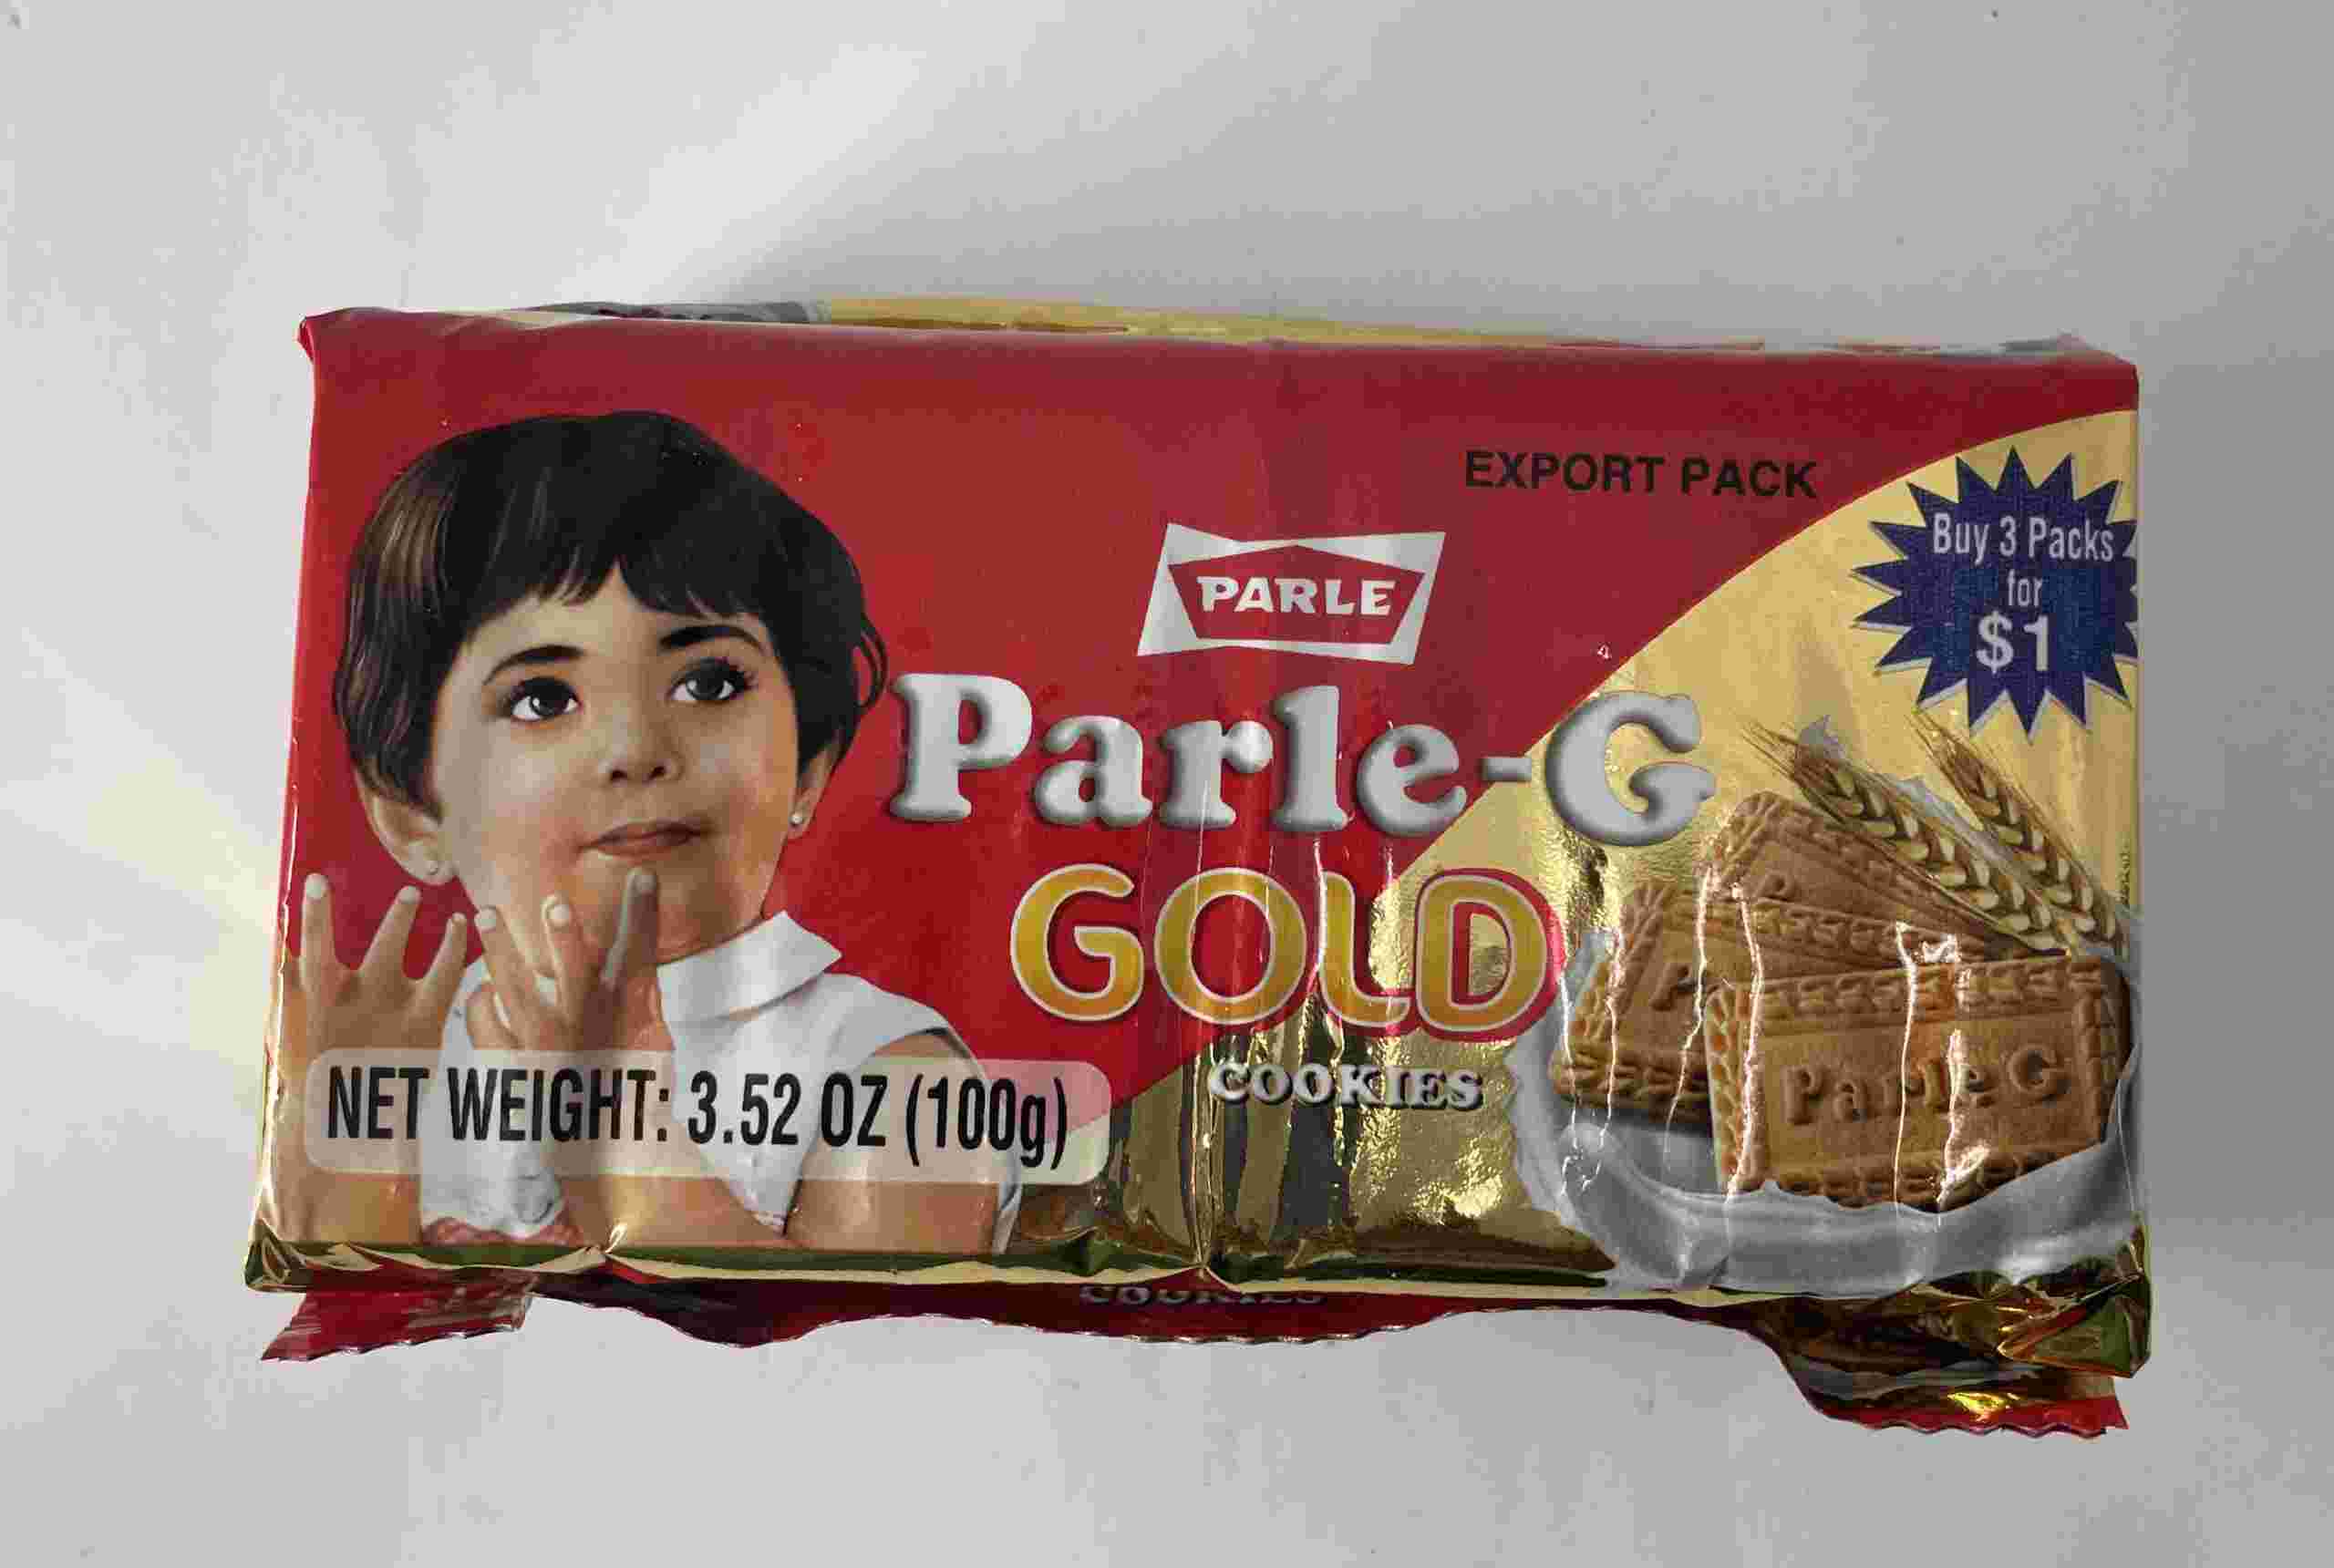 Parle Parle -G Gold